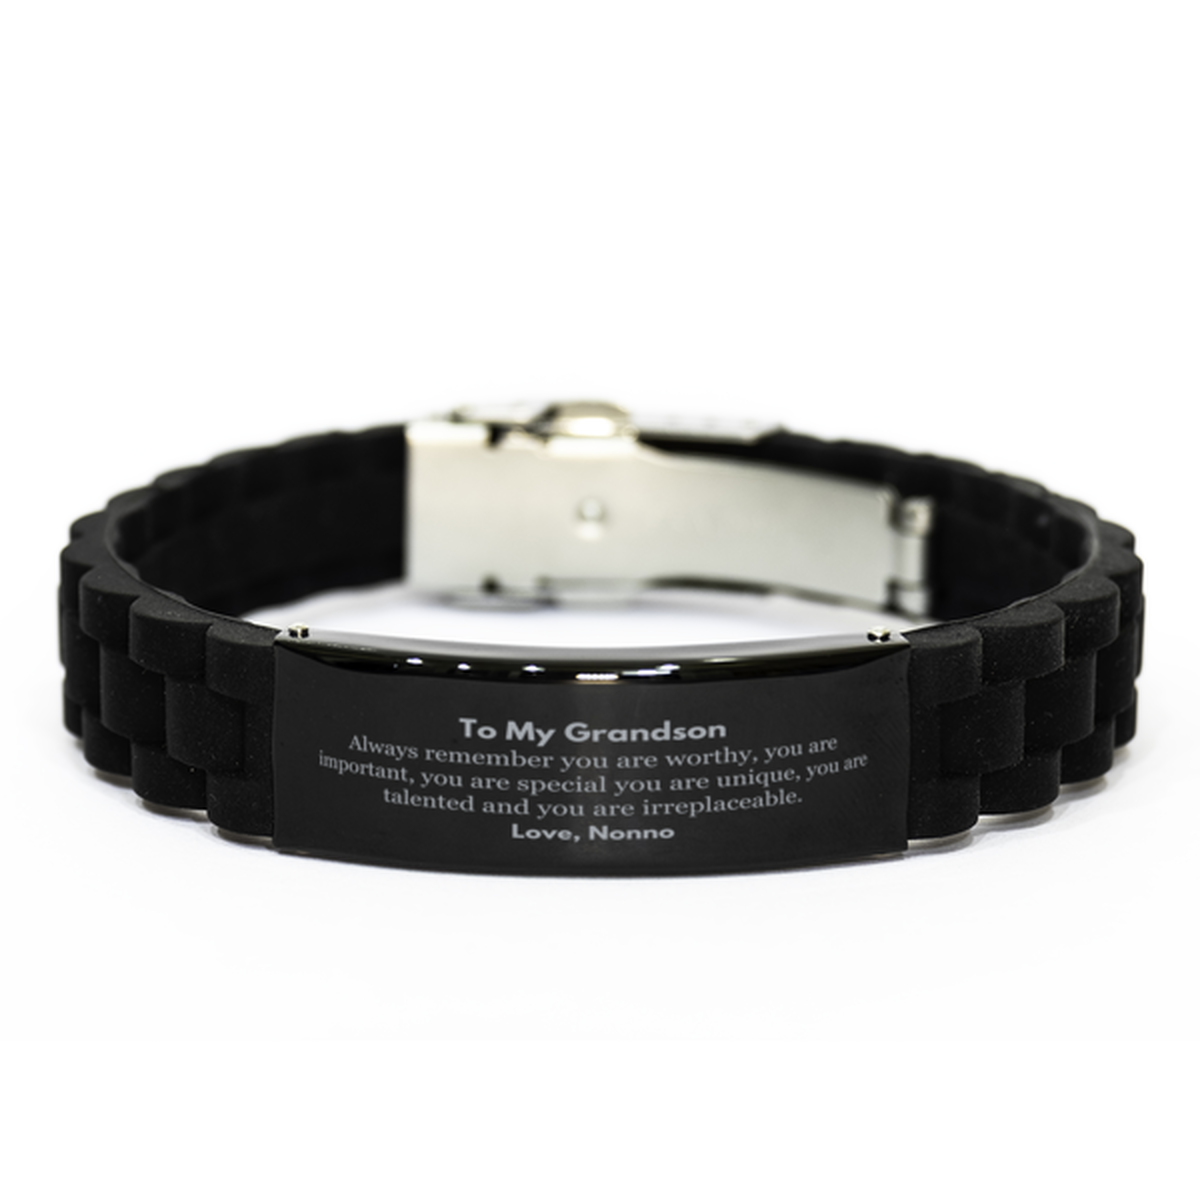 Grandson Birthday Gifts from Nonno, Inspirational Black Glidelock Clasp Bracelet for Grandson Christmas Graduation Gifts for Grandson Always remember you are worthy, you are important. Love, Nonno